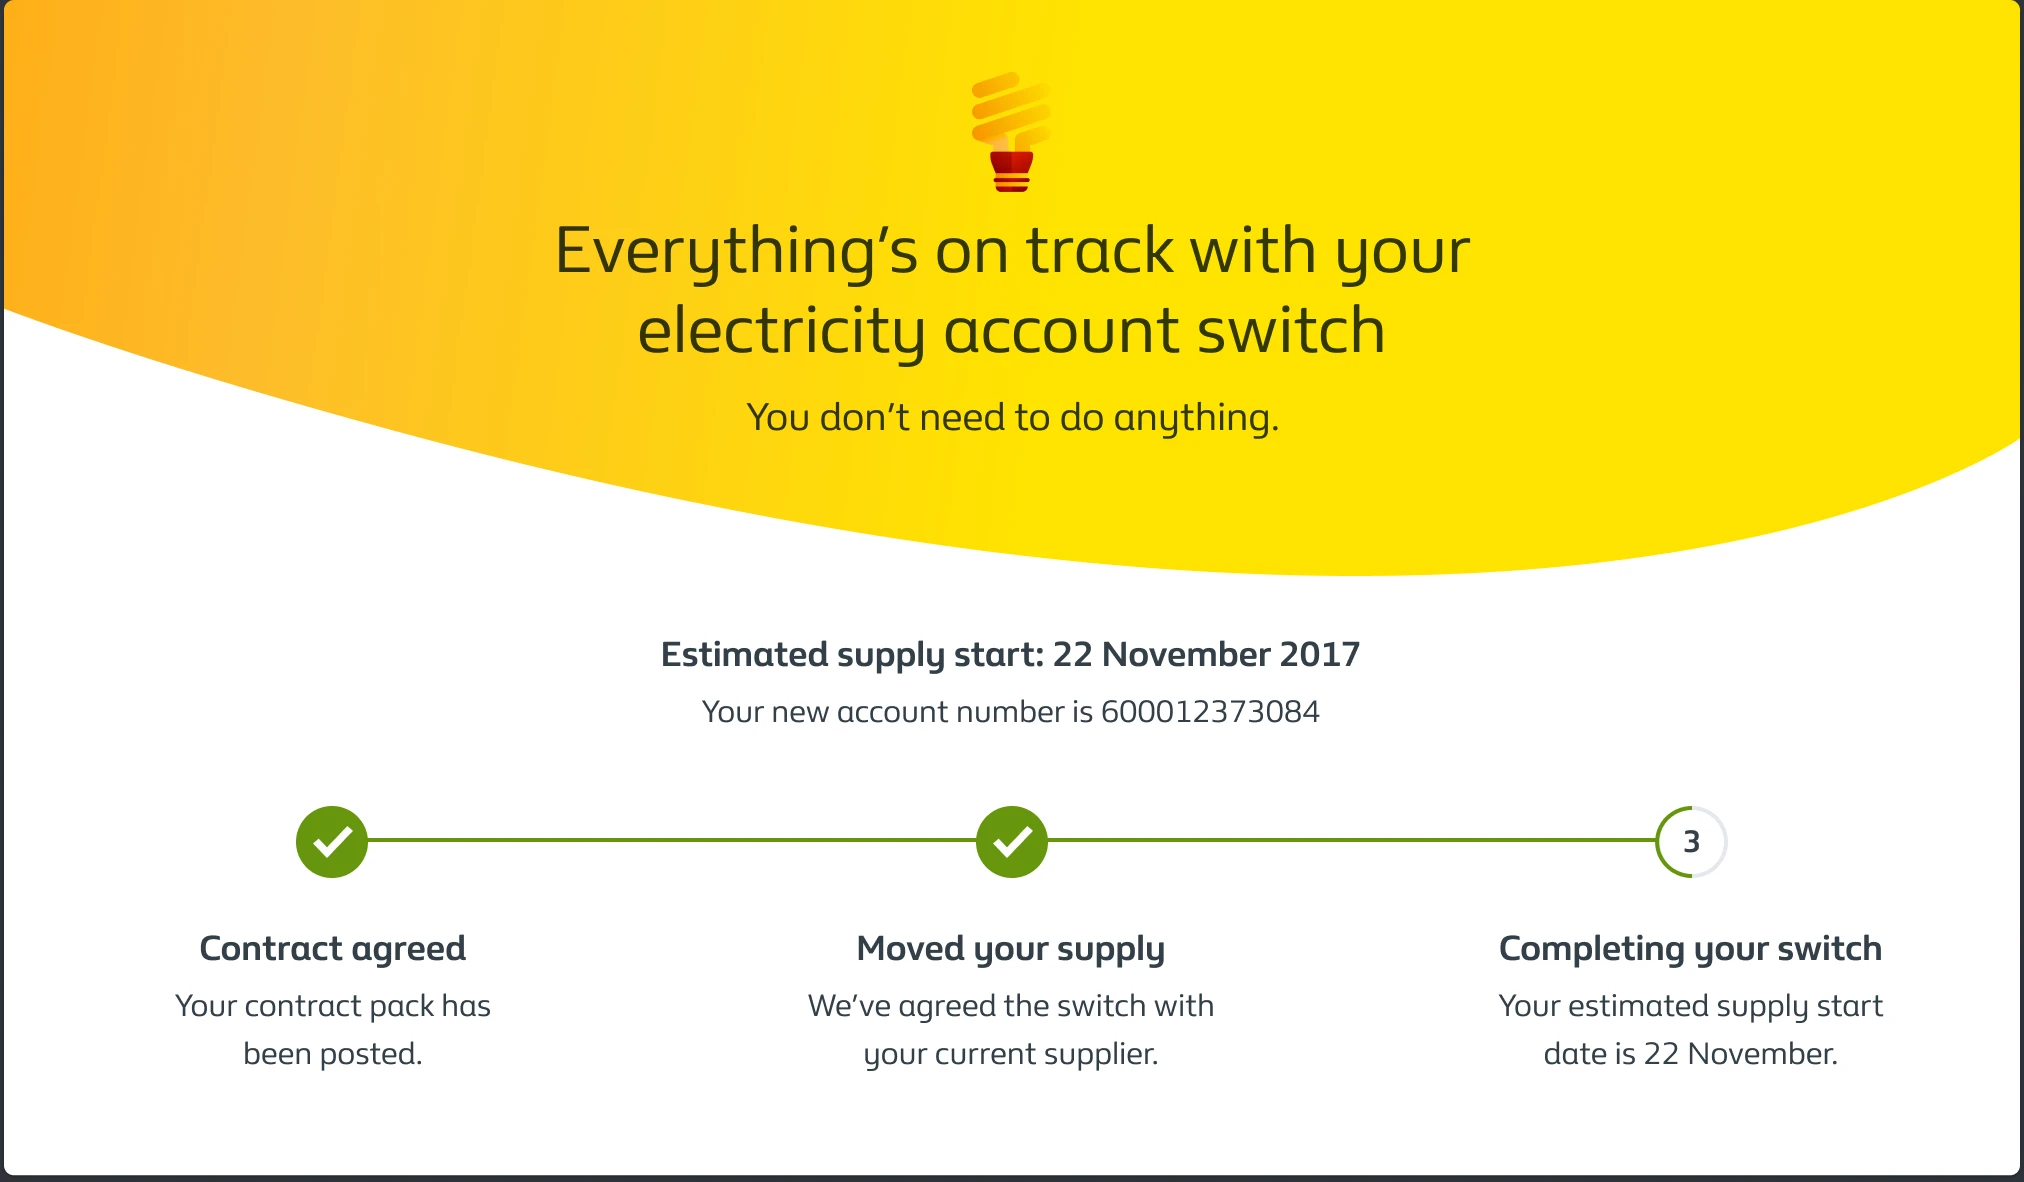 Screenshot of message outlining progress switching from another supplier to British Gas